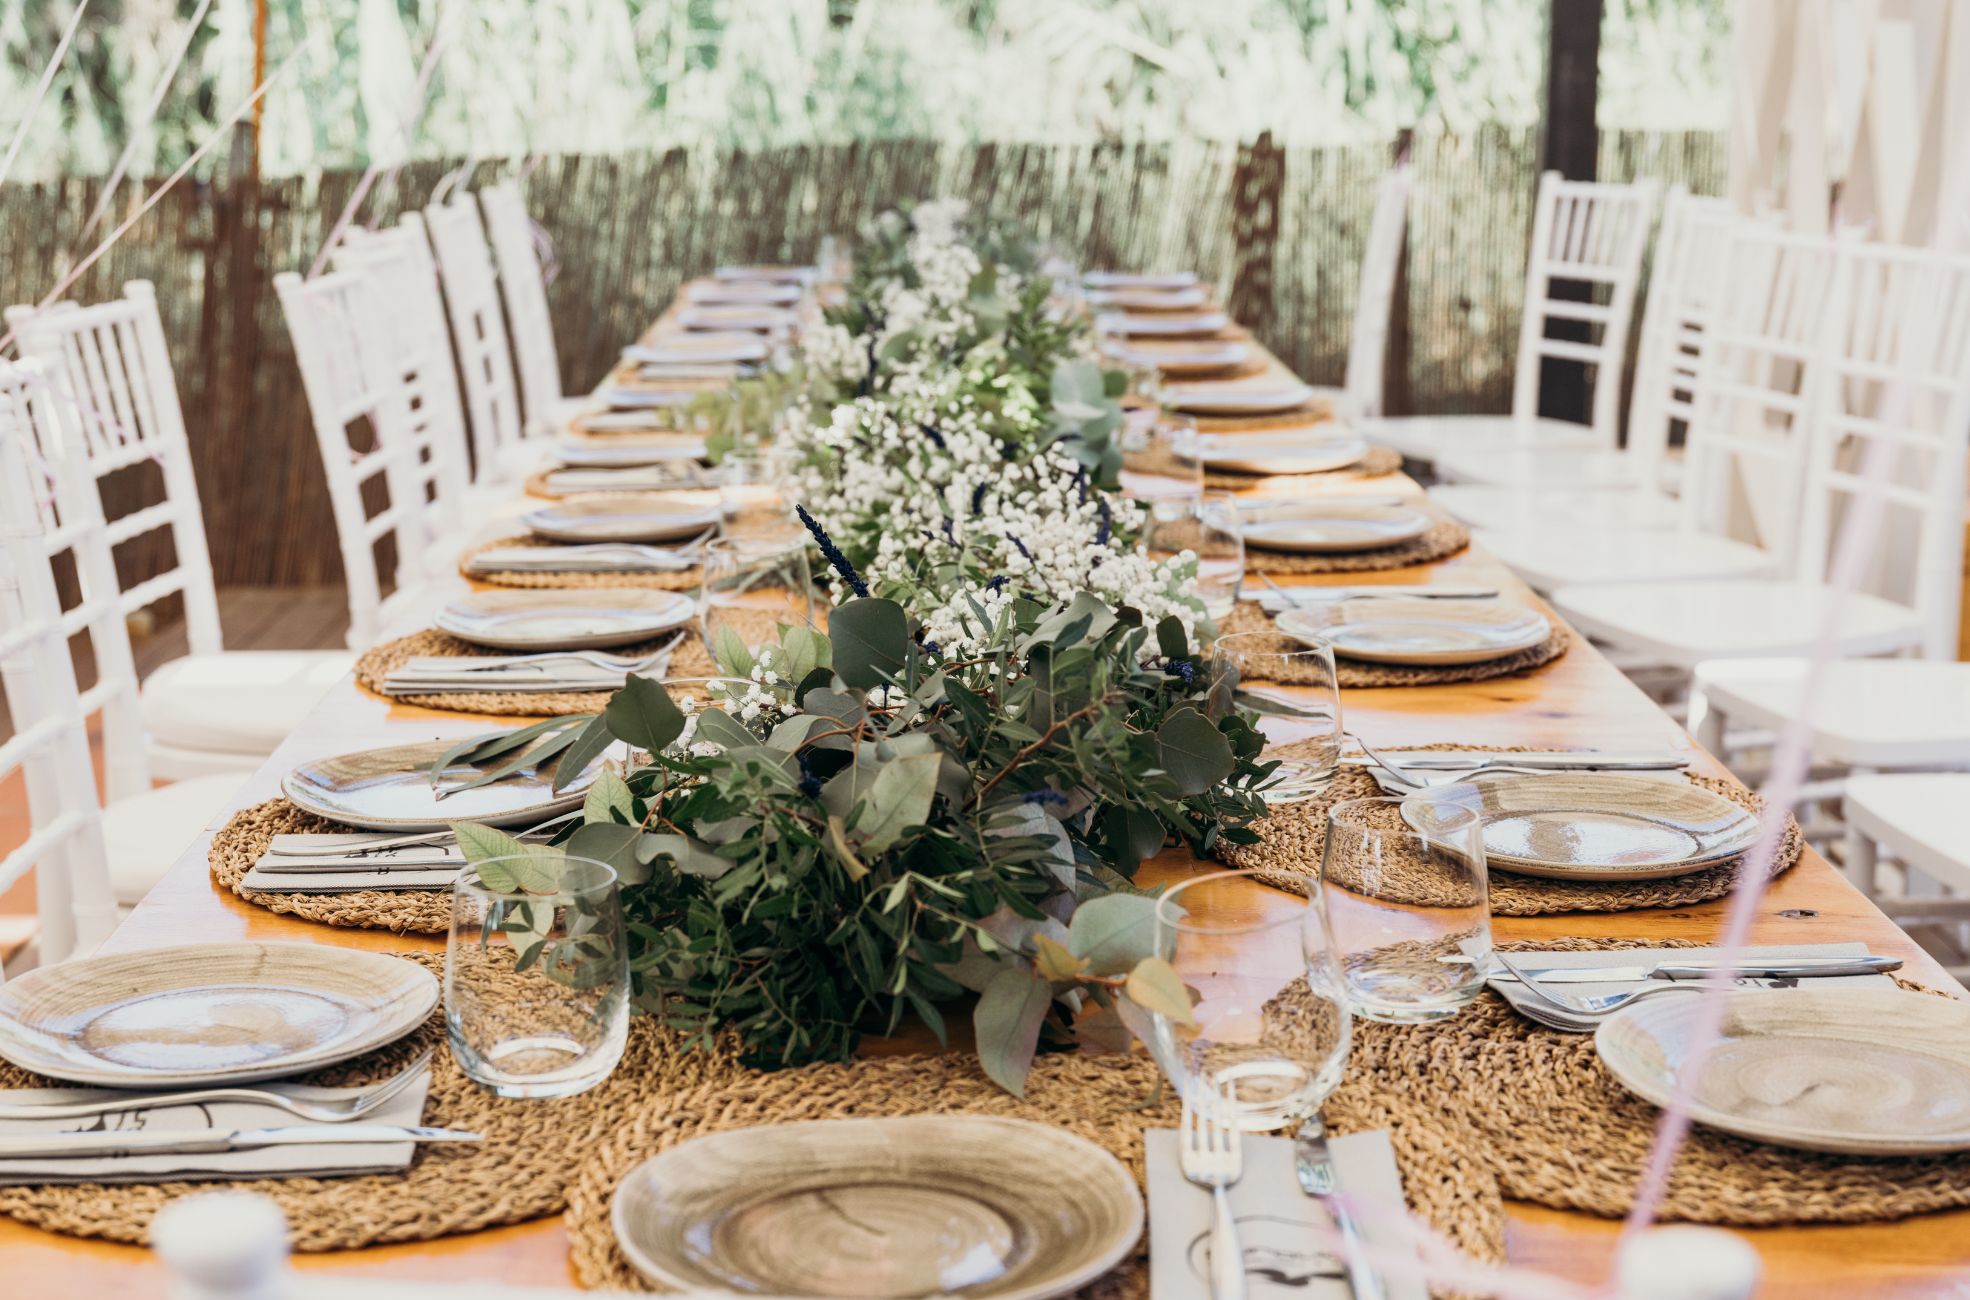 Stock Photo of Wedding Table Before MC Seats Guests